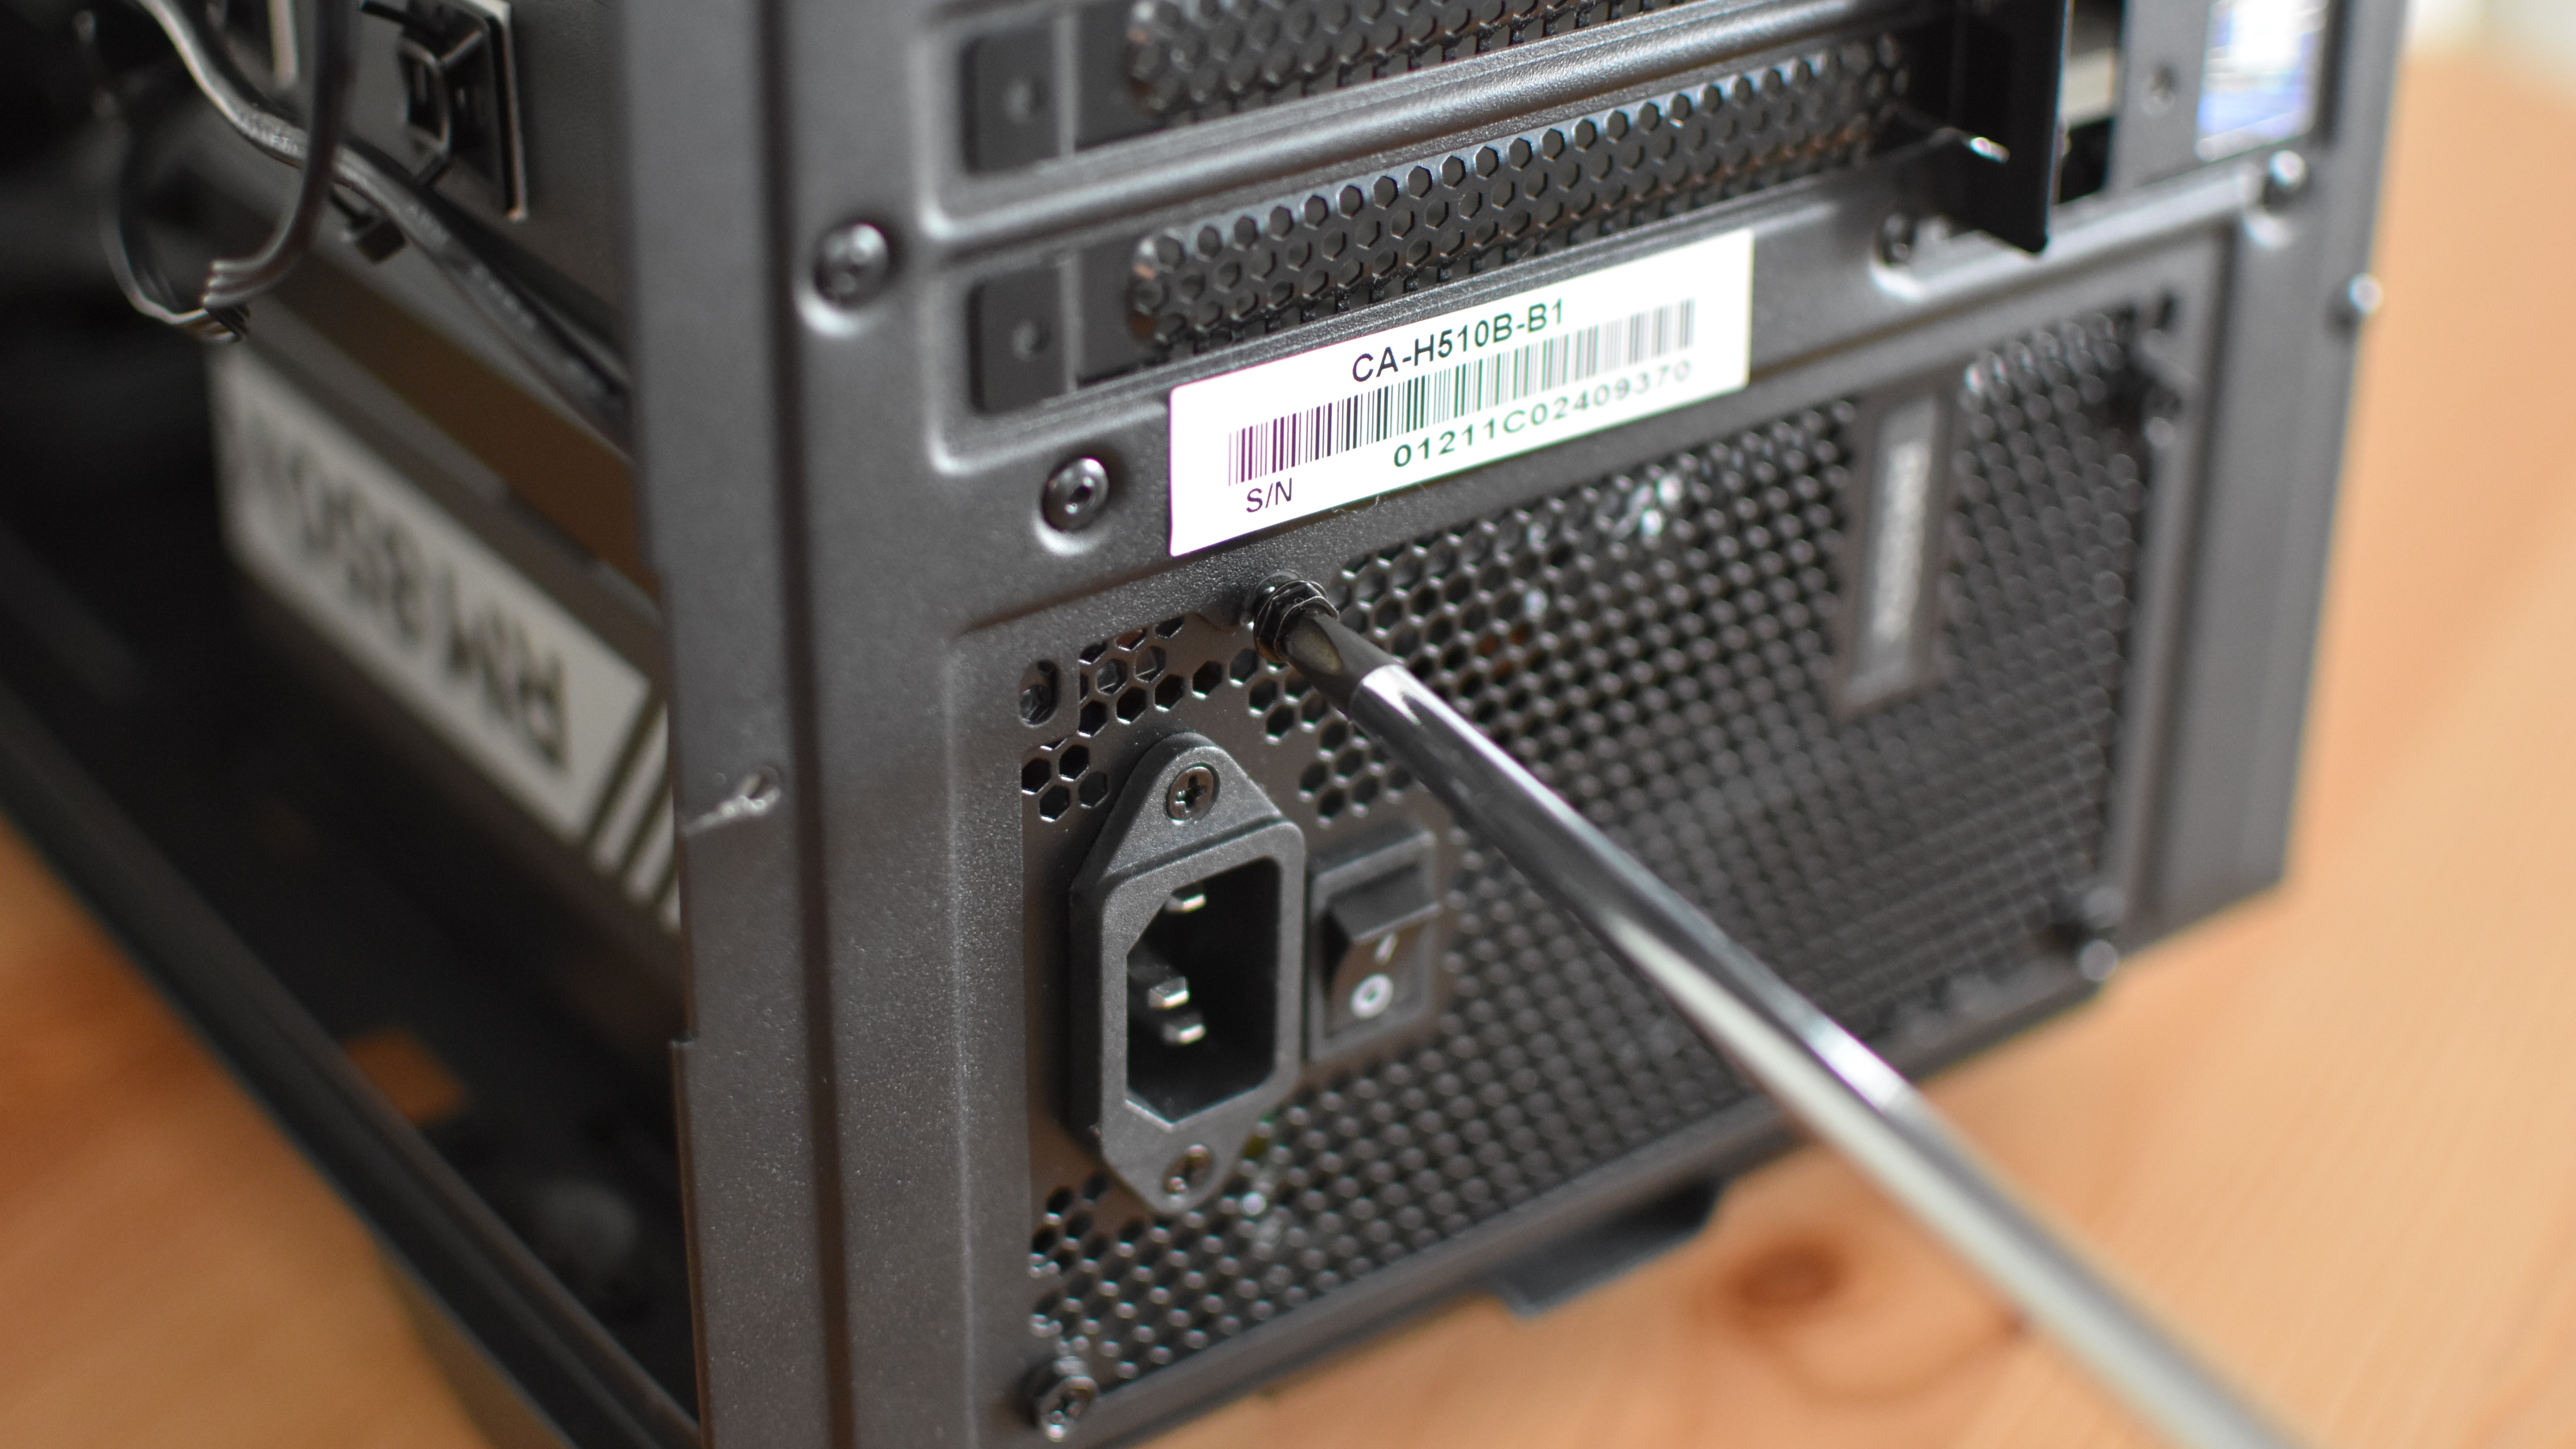 A PSU being fixed in position by tightening the PC's mounting screws.